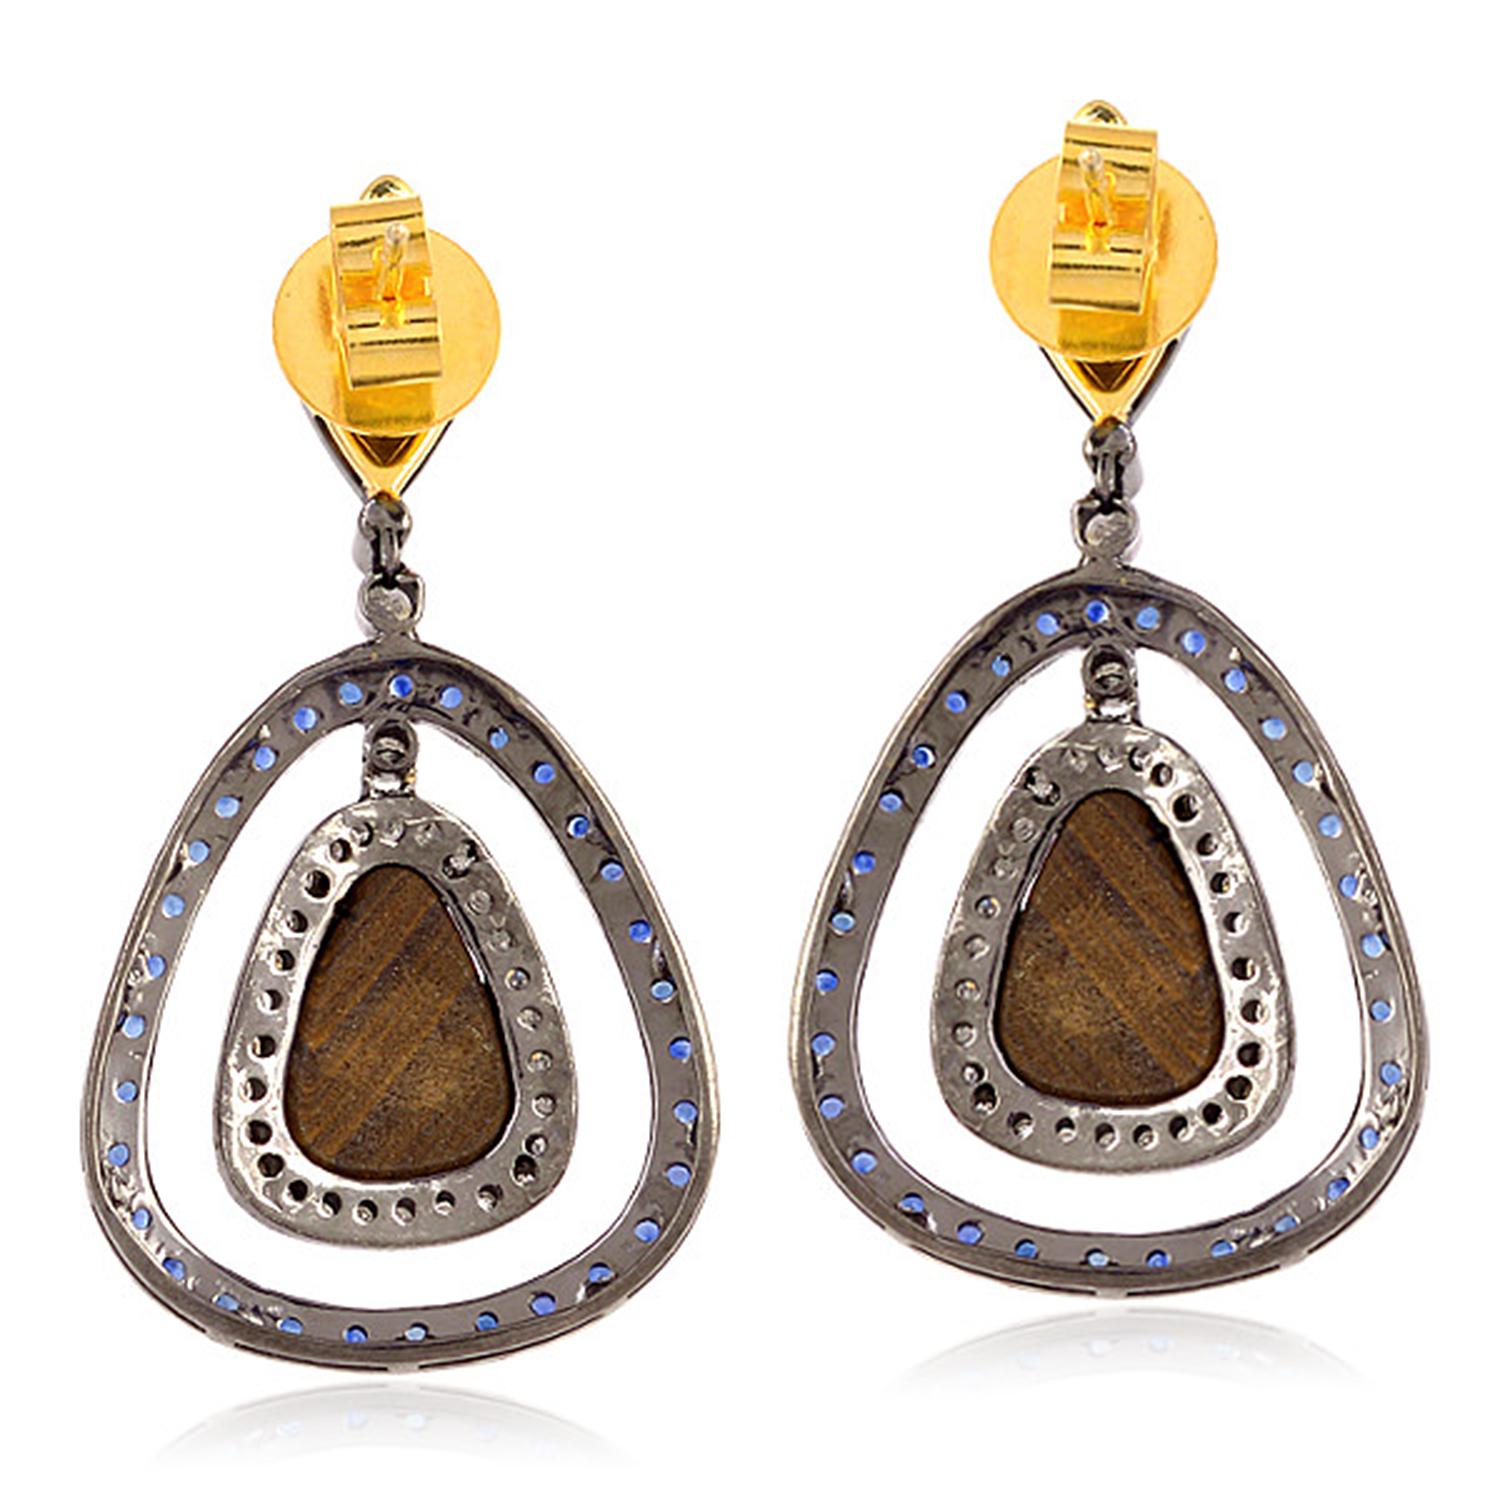 Cast from 18-karat gold & sterling silver, these beautiful drop earrings are set with 4.35 carats Opal doublets, 2.16 sapphire and .92 carats of glimmering diamonds. 

FOLLOW  MEGHNA JEWELS storefront to view the latest collection & exclusive